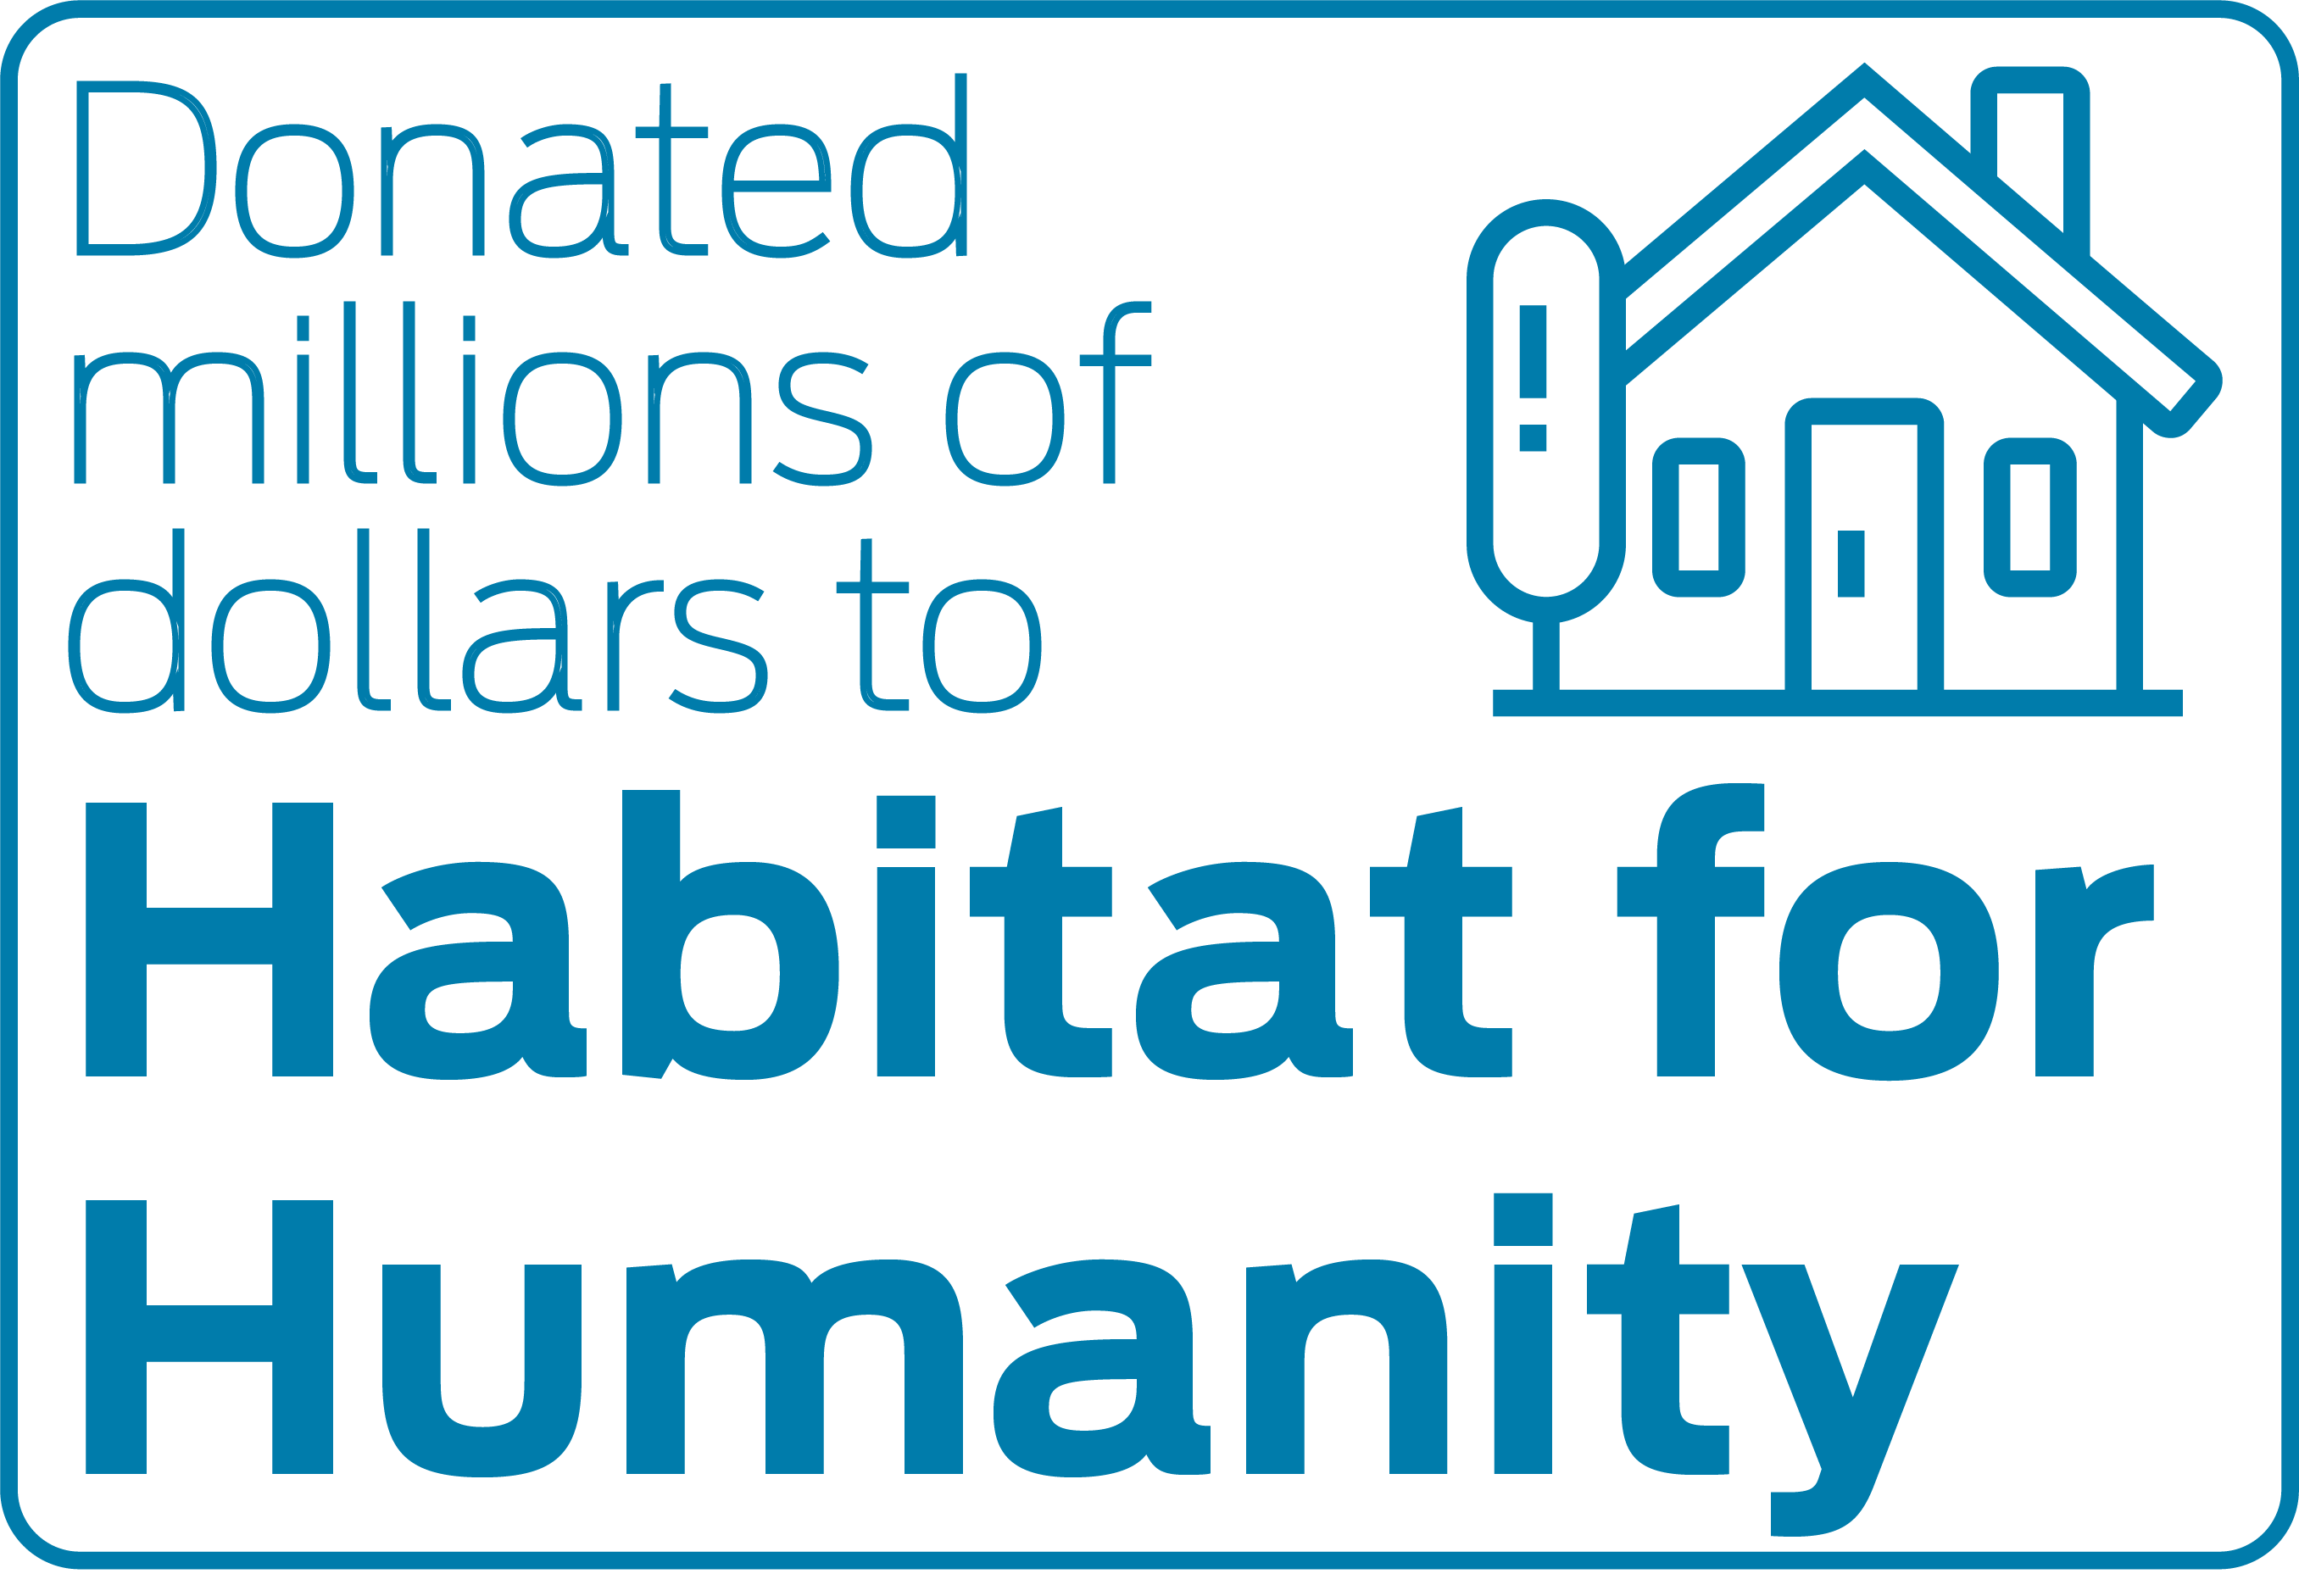 Donated millions of dollars to Habitat for Humanity